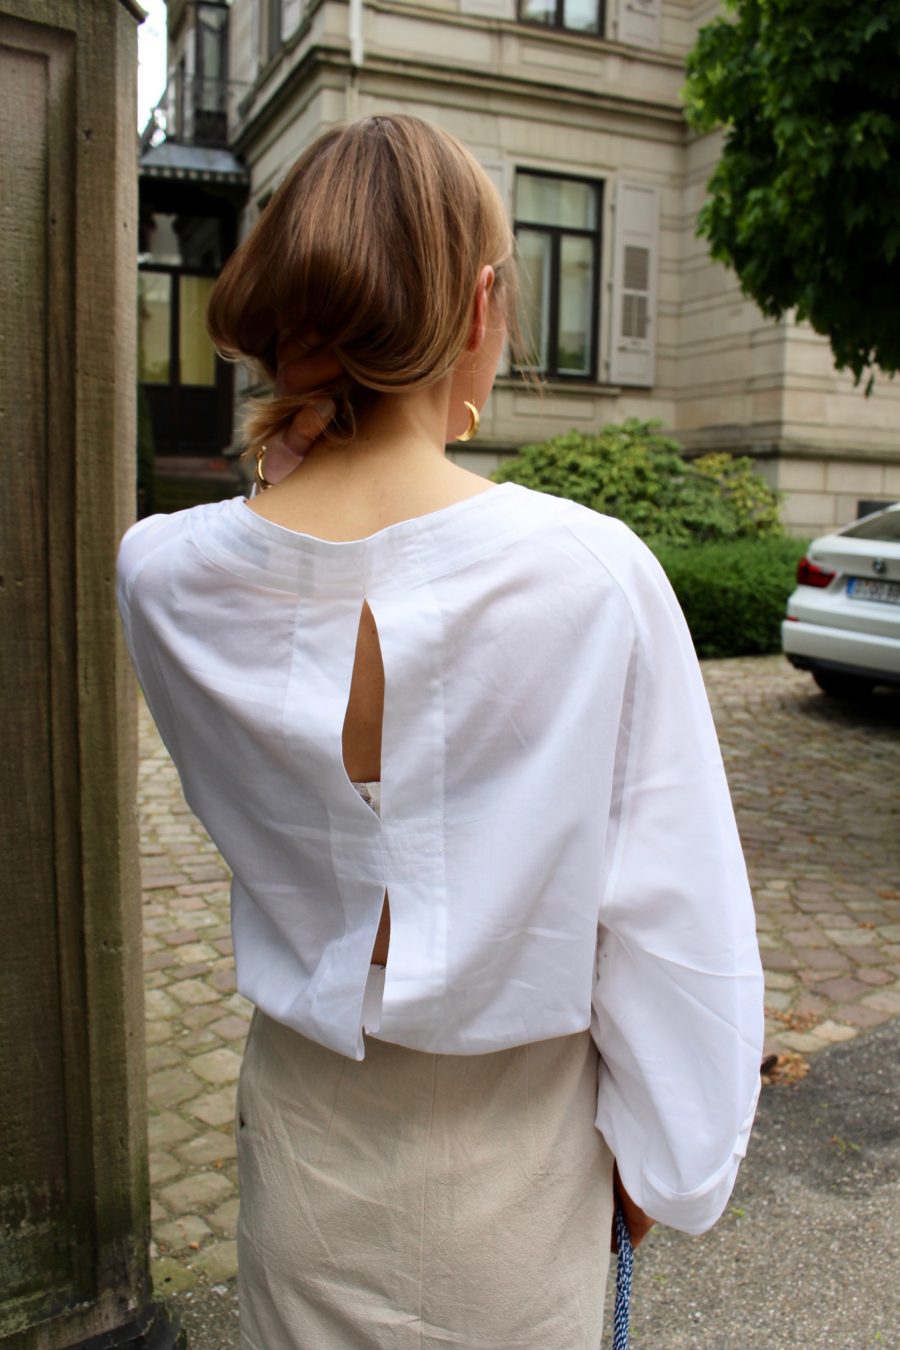 The A-Line Bluse open back